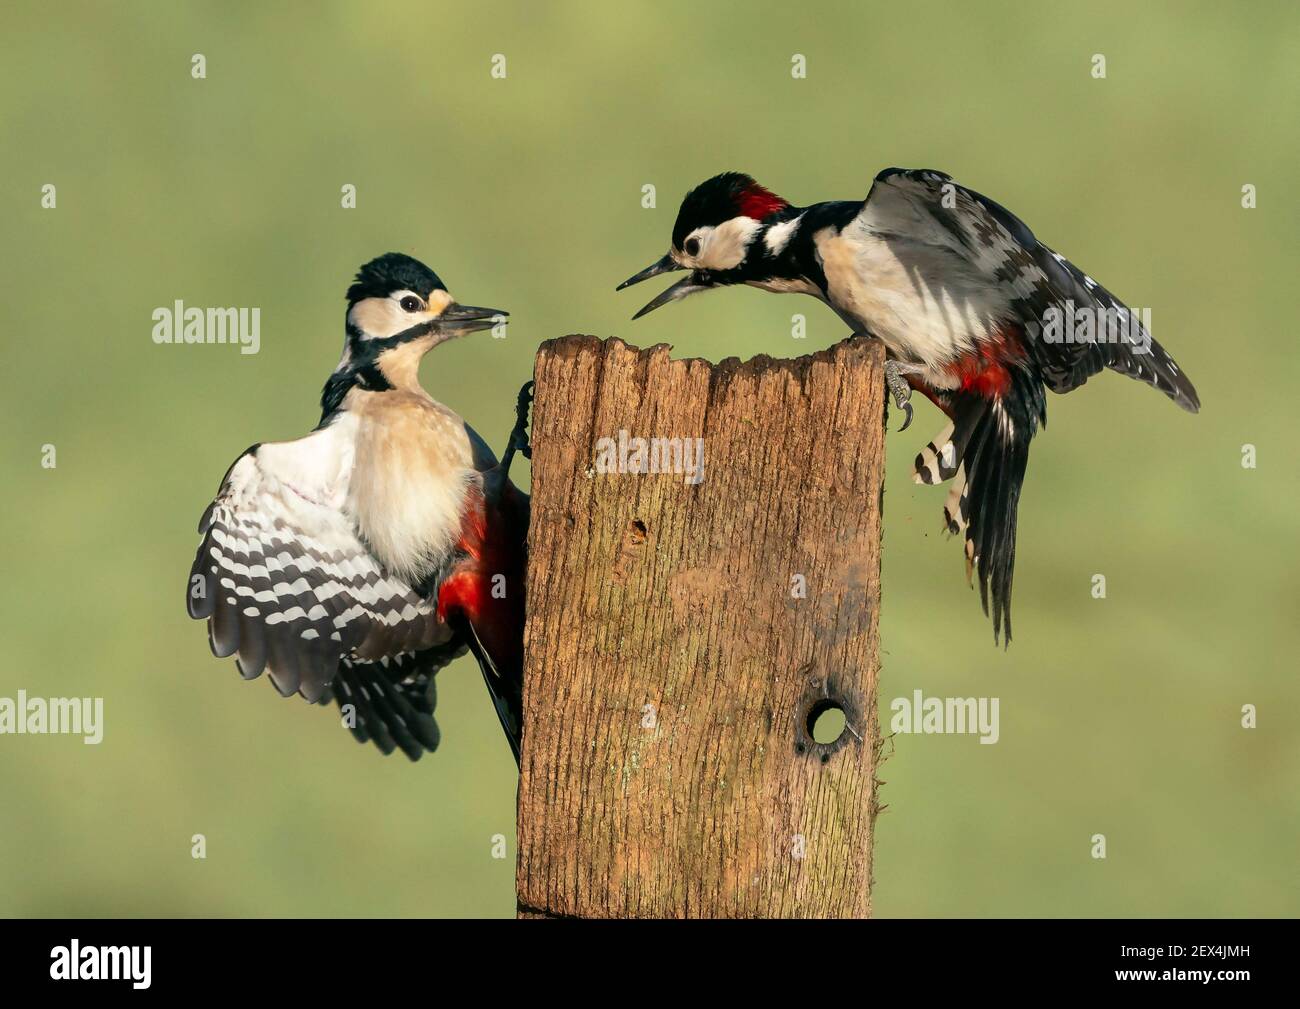 Great spotted woodpecker (Dendrocopos major) fighting, England Stock Photo